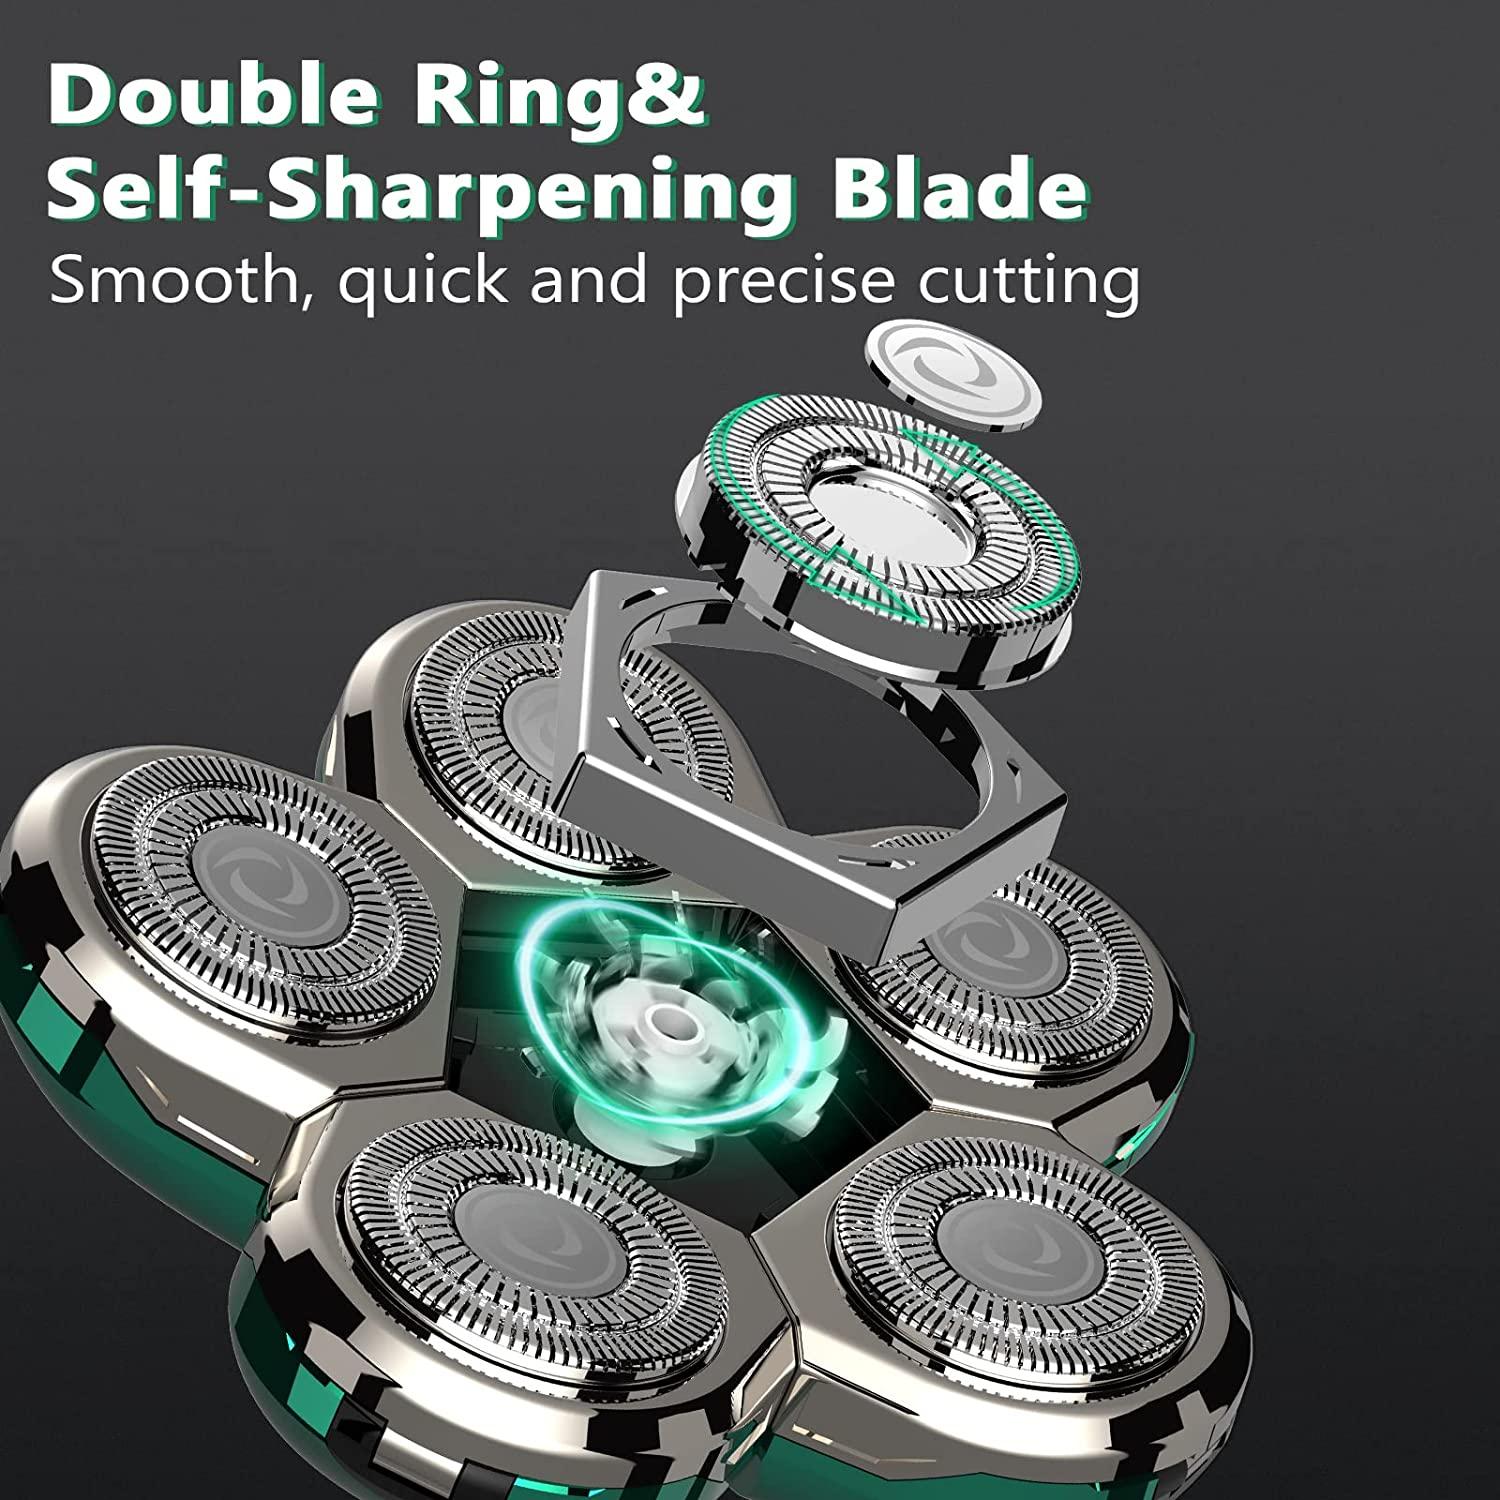 New! A Razor Sharpener For 3 to 5 Shaving Blades, Cleans & Protects All  Razors!